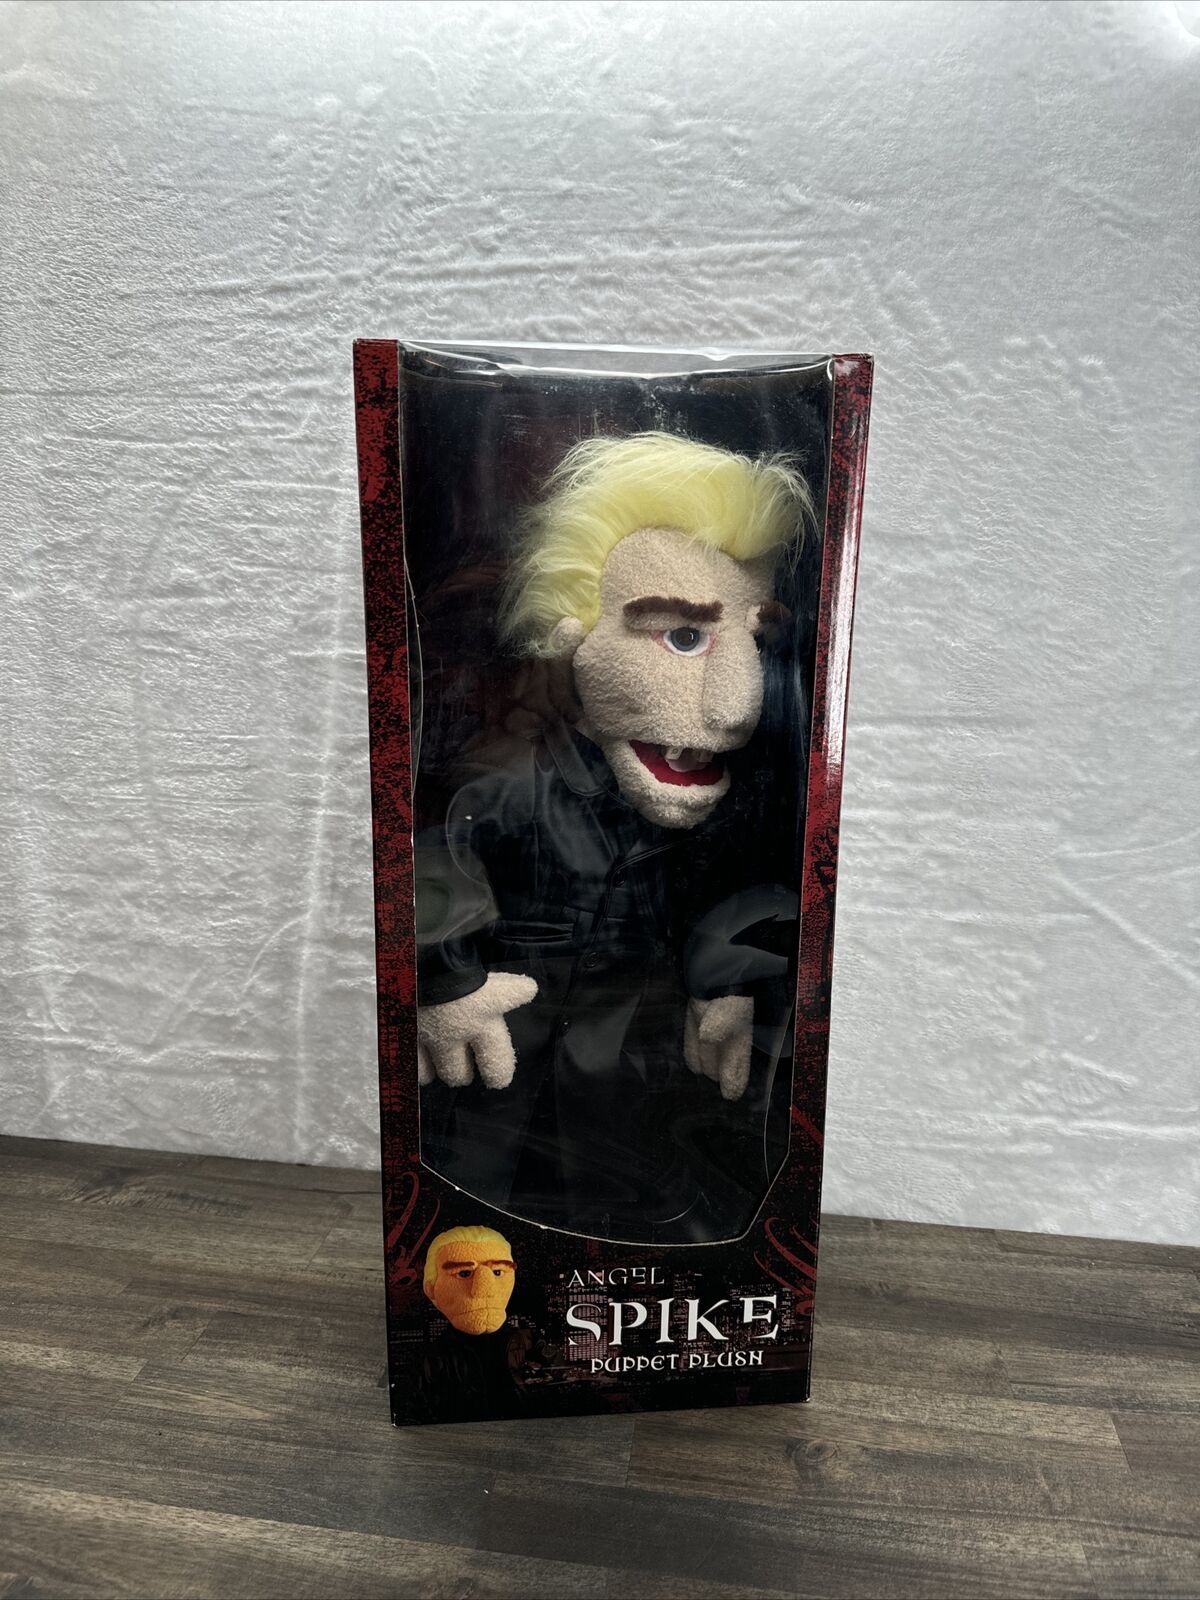 Smile Time Spike Puppet Replica from Angel, Limited Edition (Open Box)